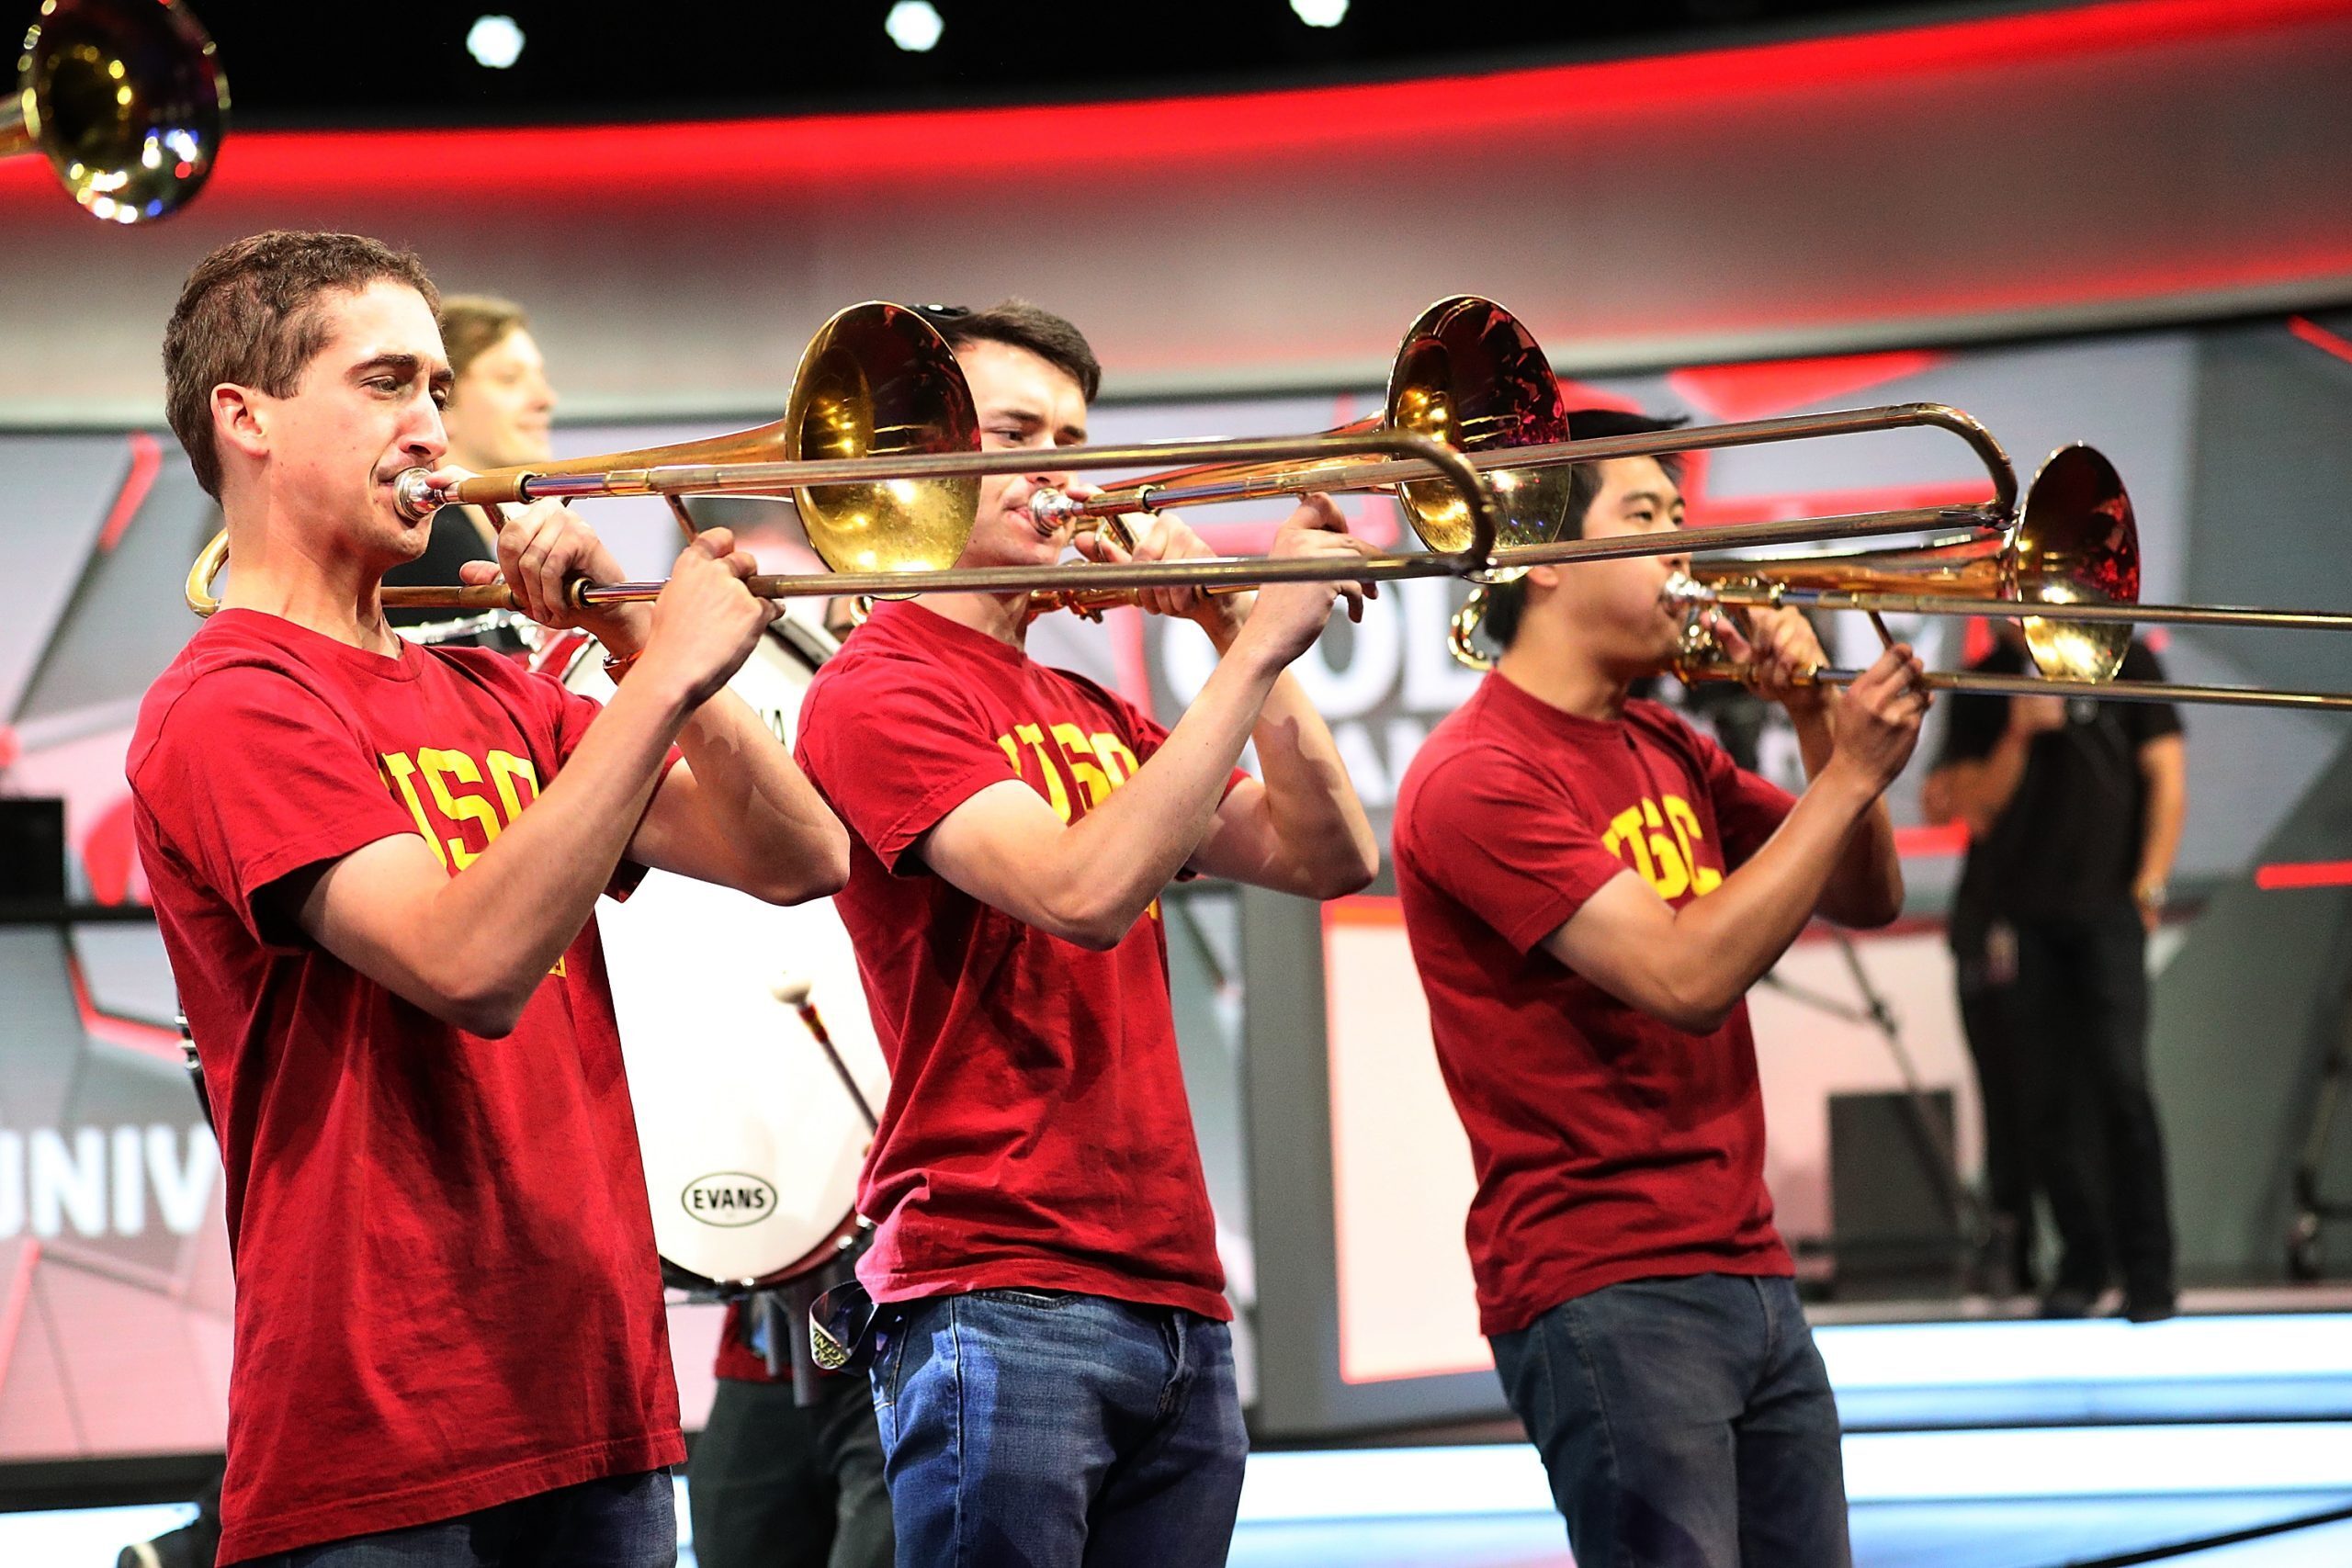 The USC marching band performs during the League of Legends College Championships. (Photo courtesy of Getty Images)